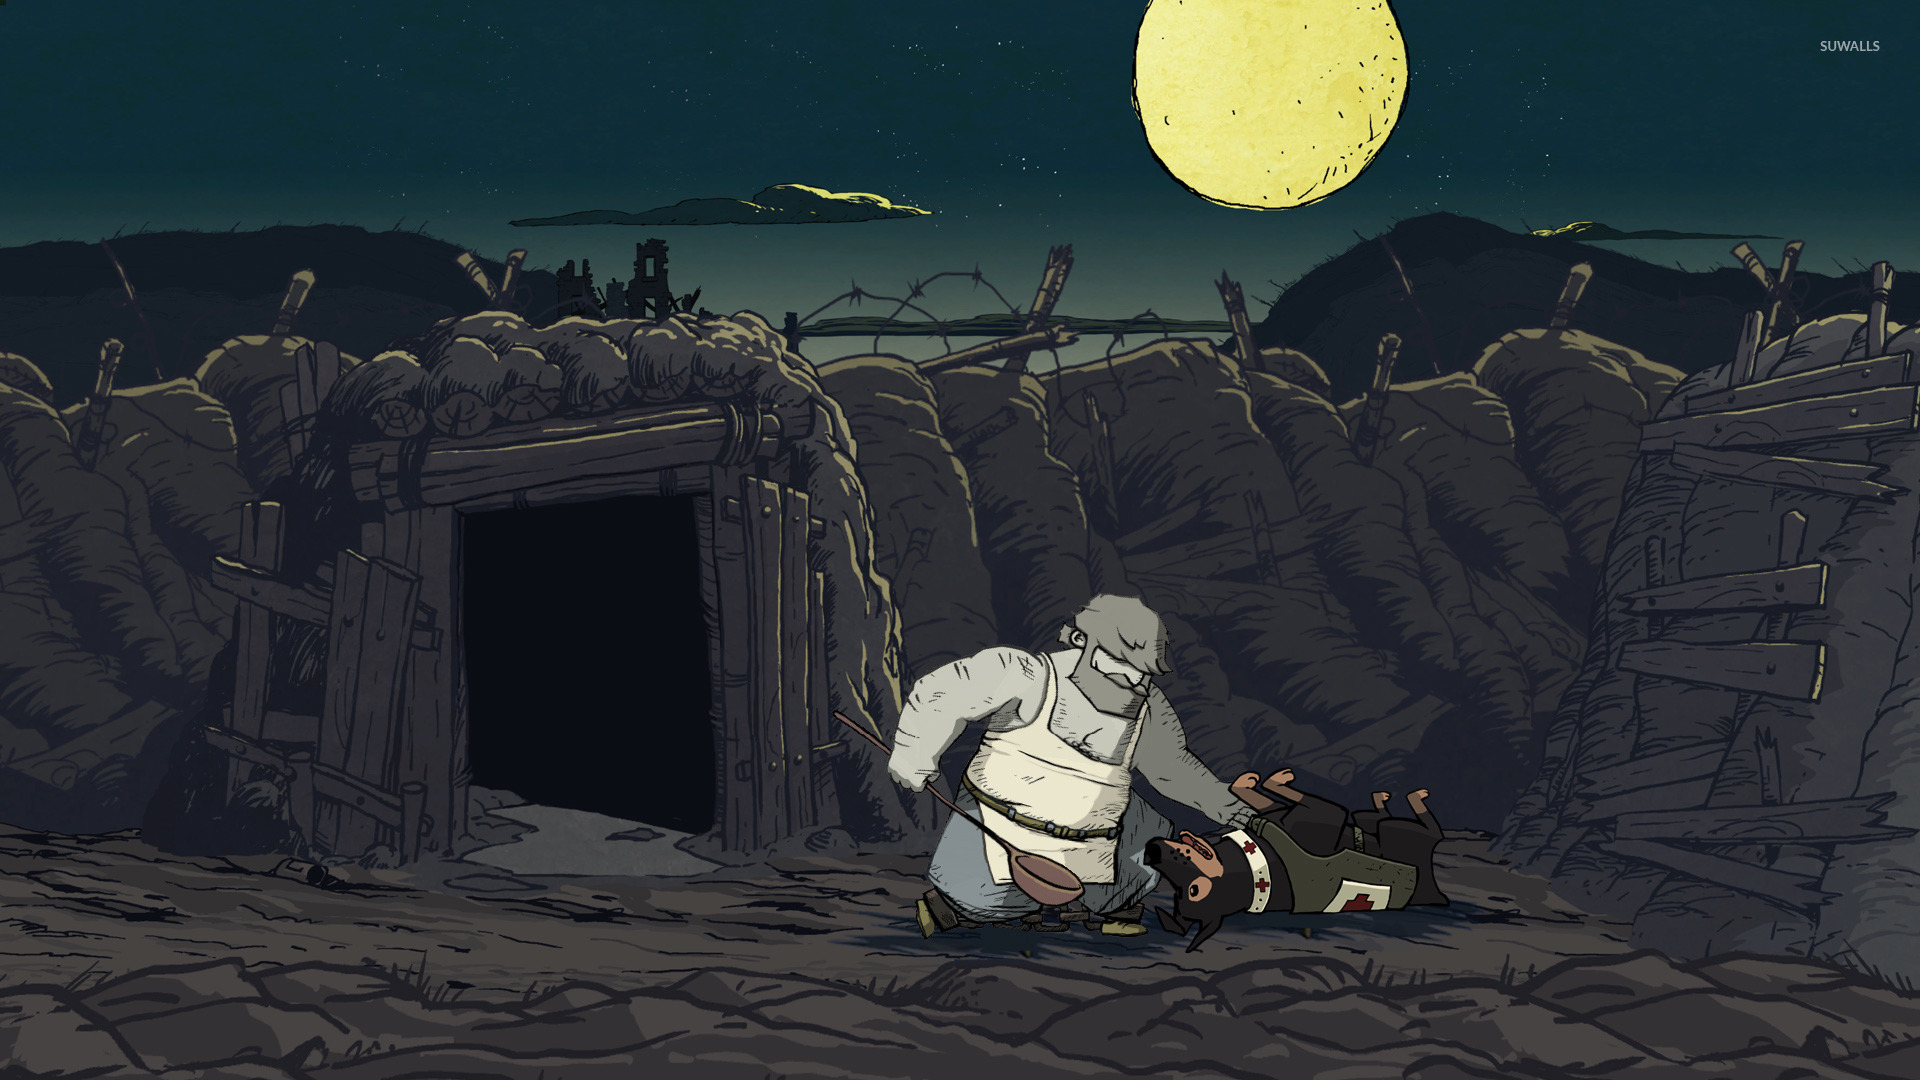 Valiant Hearts: The Great War wallpaper - Game wallpapers - #25930